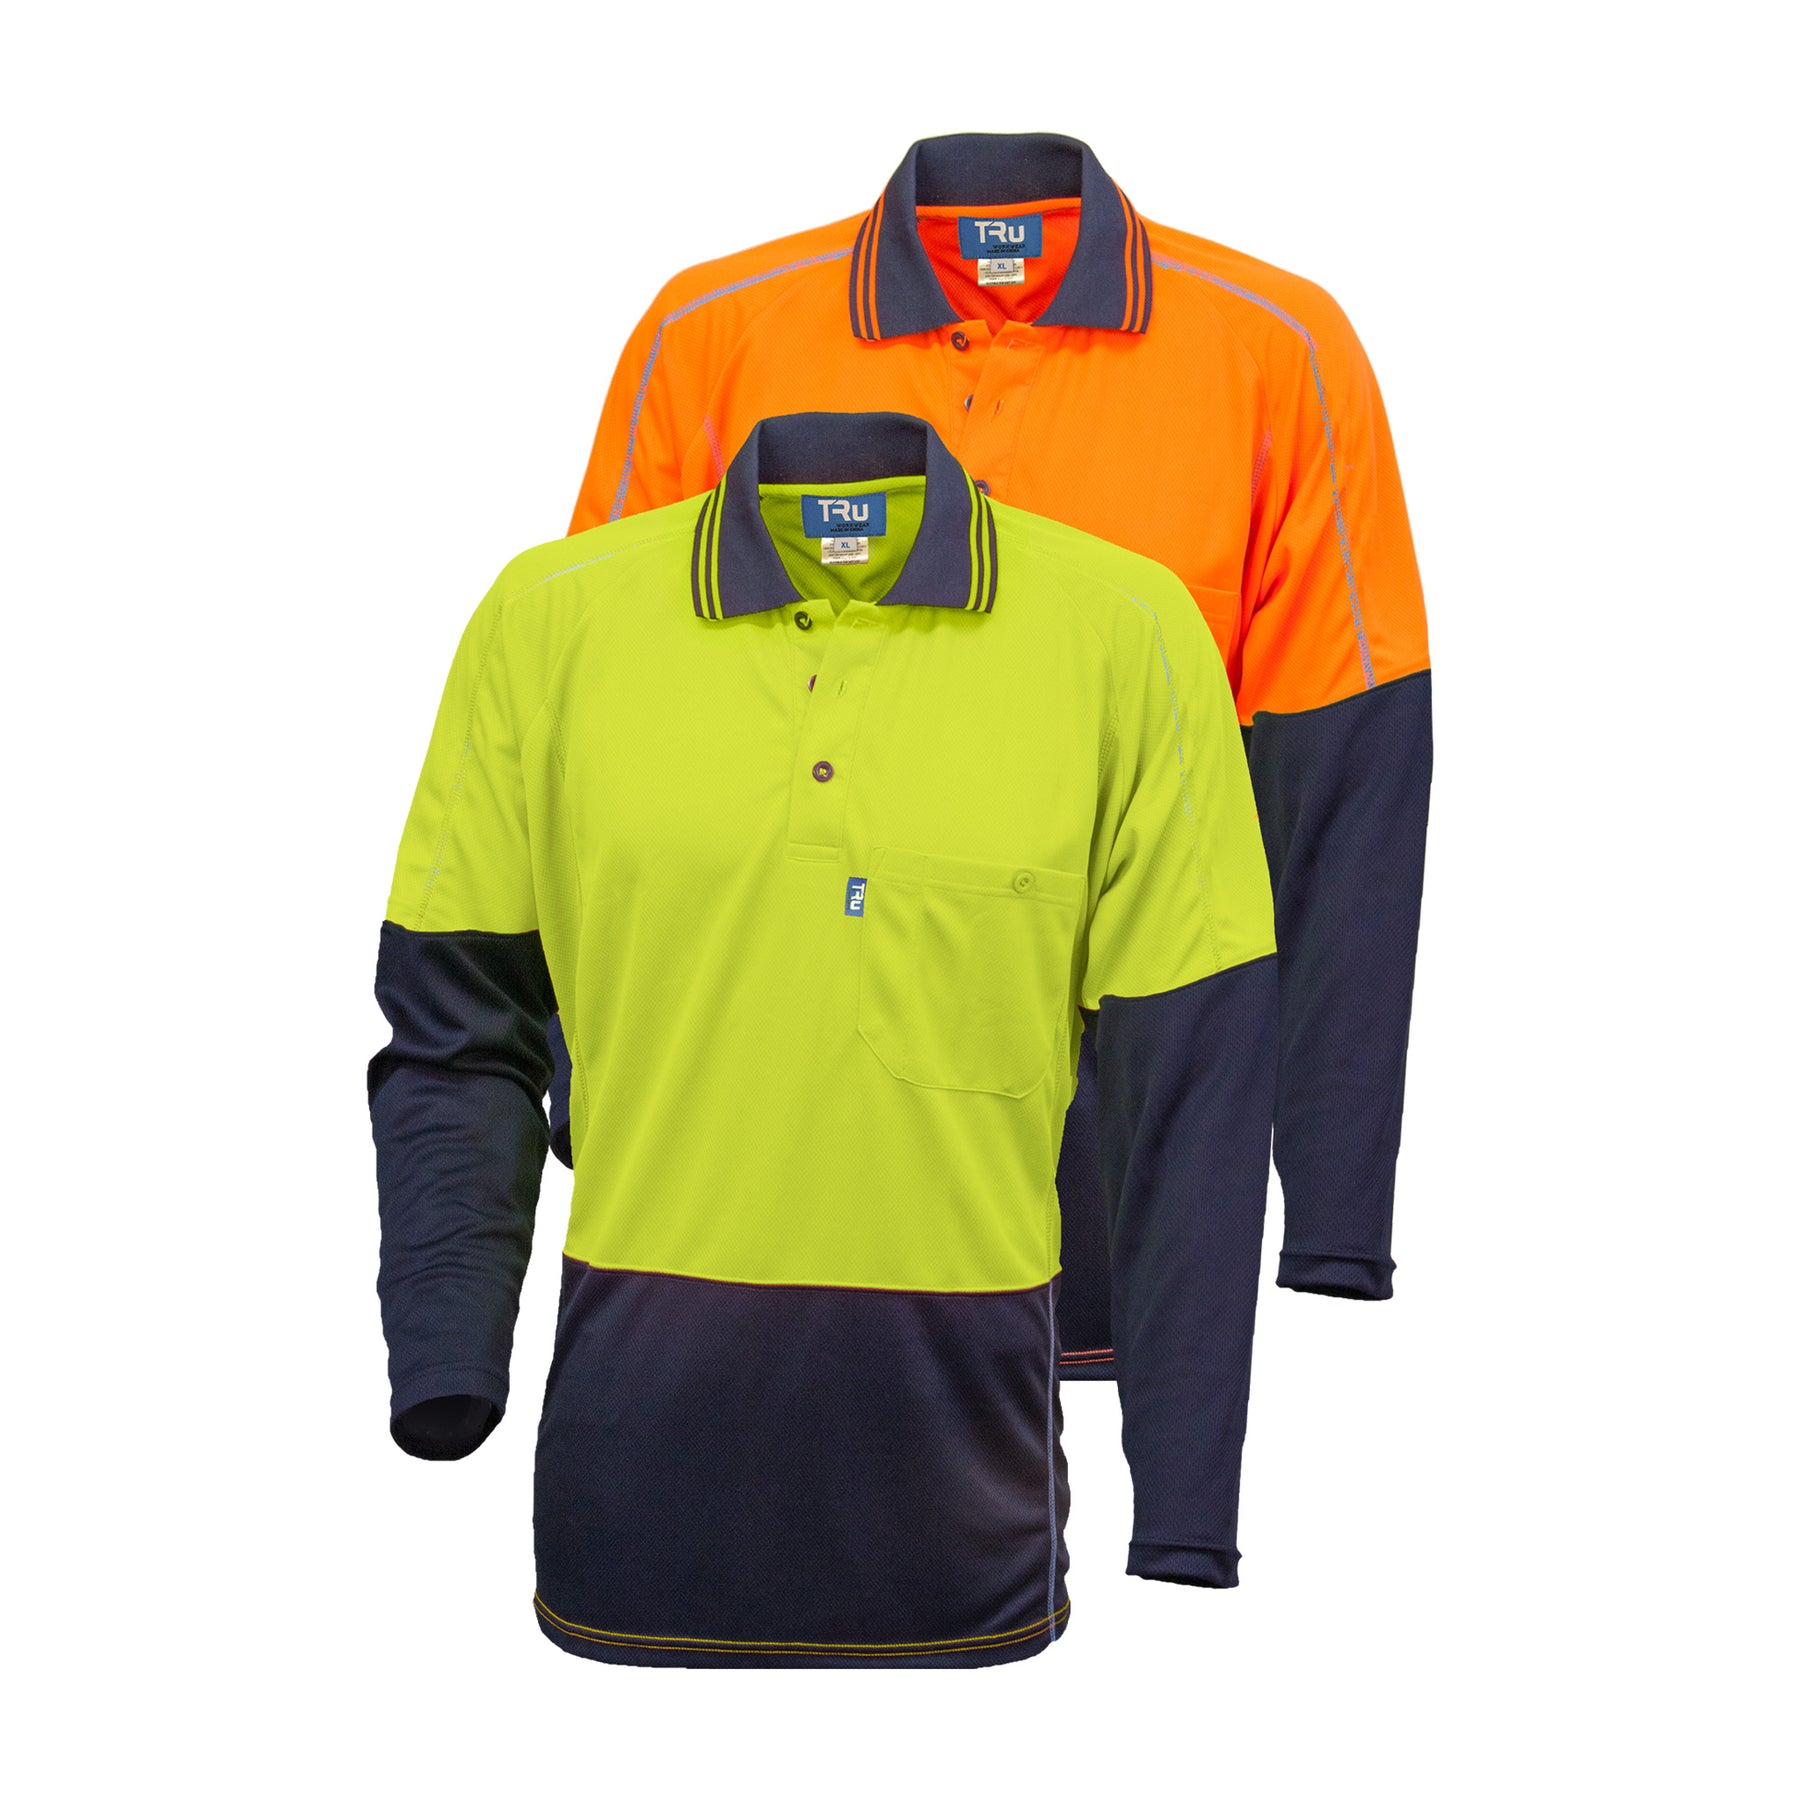 micromesh hi vis polo in orange navy and yellow navy